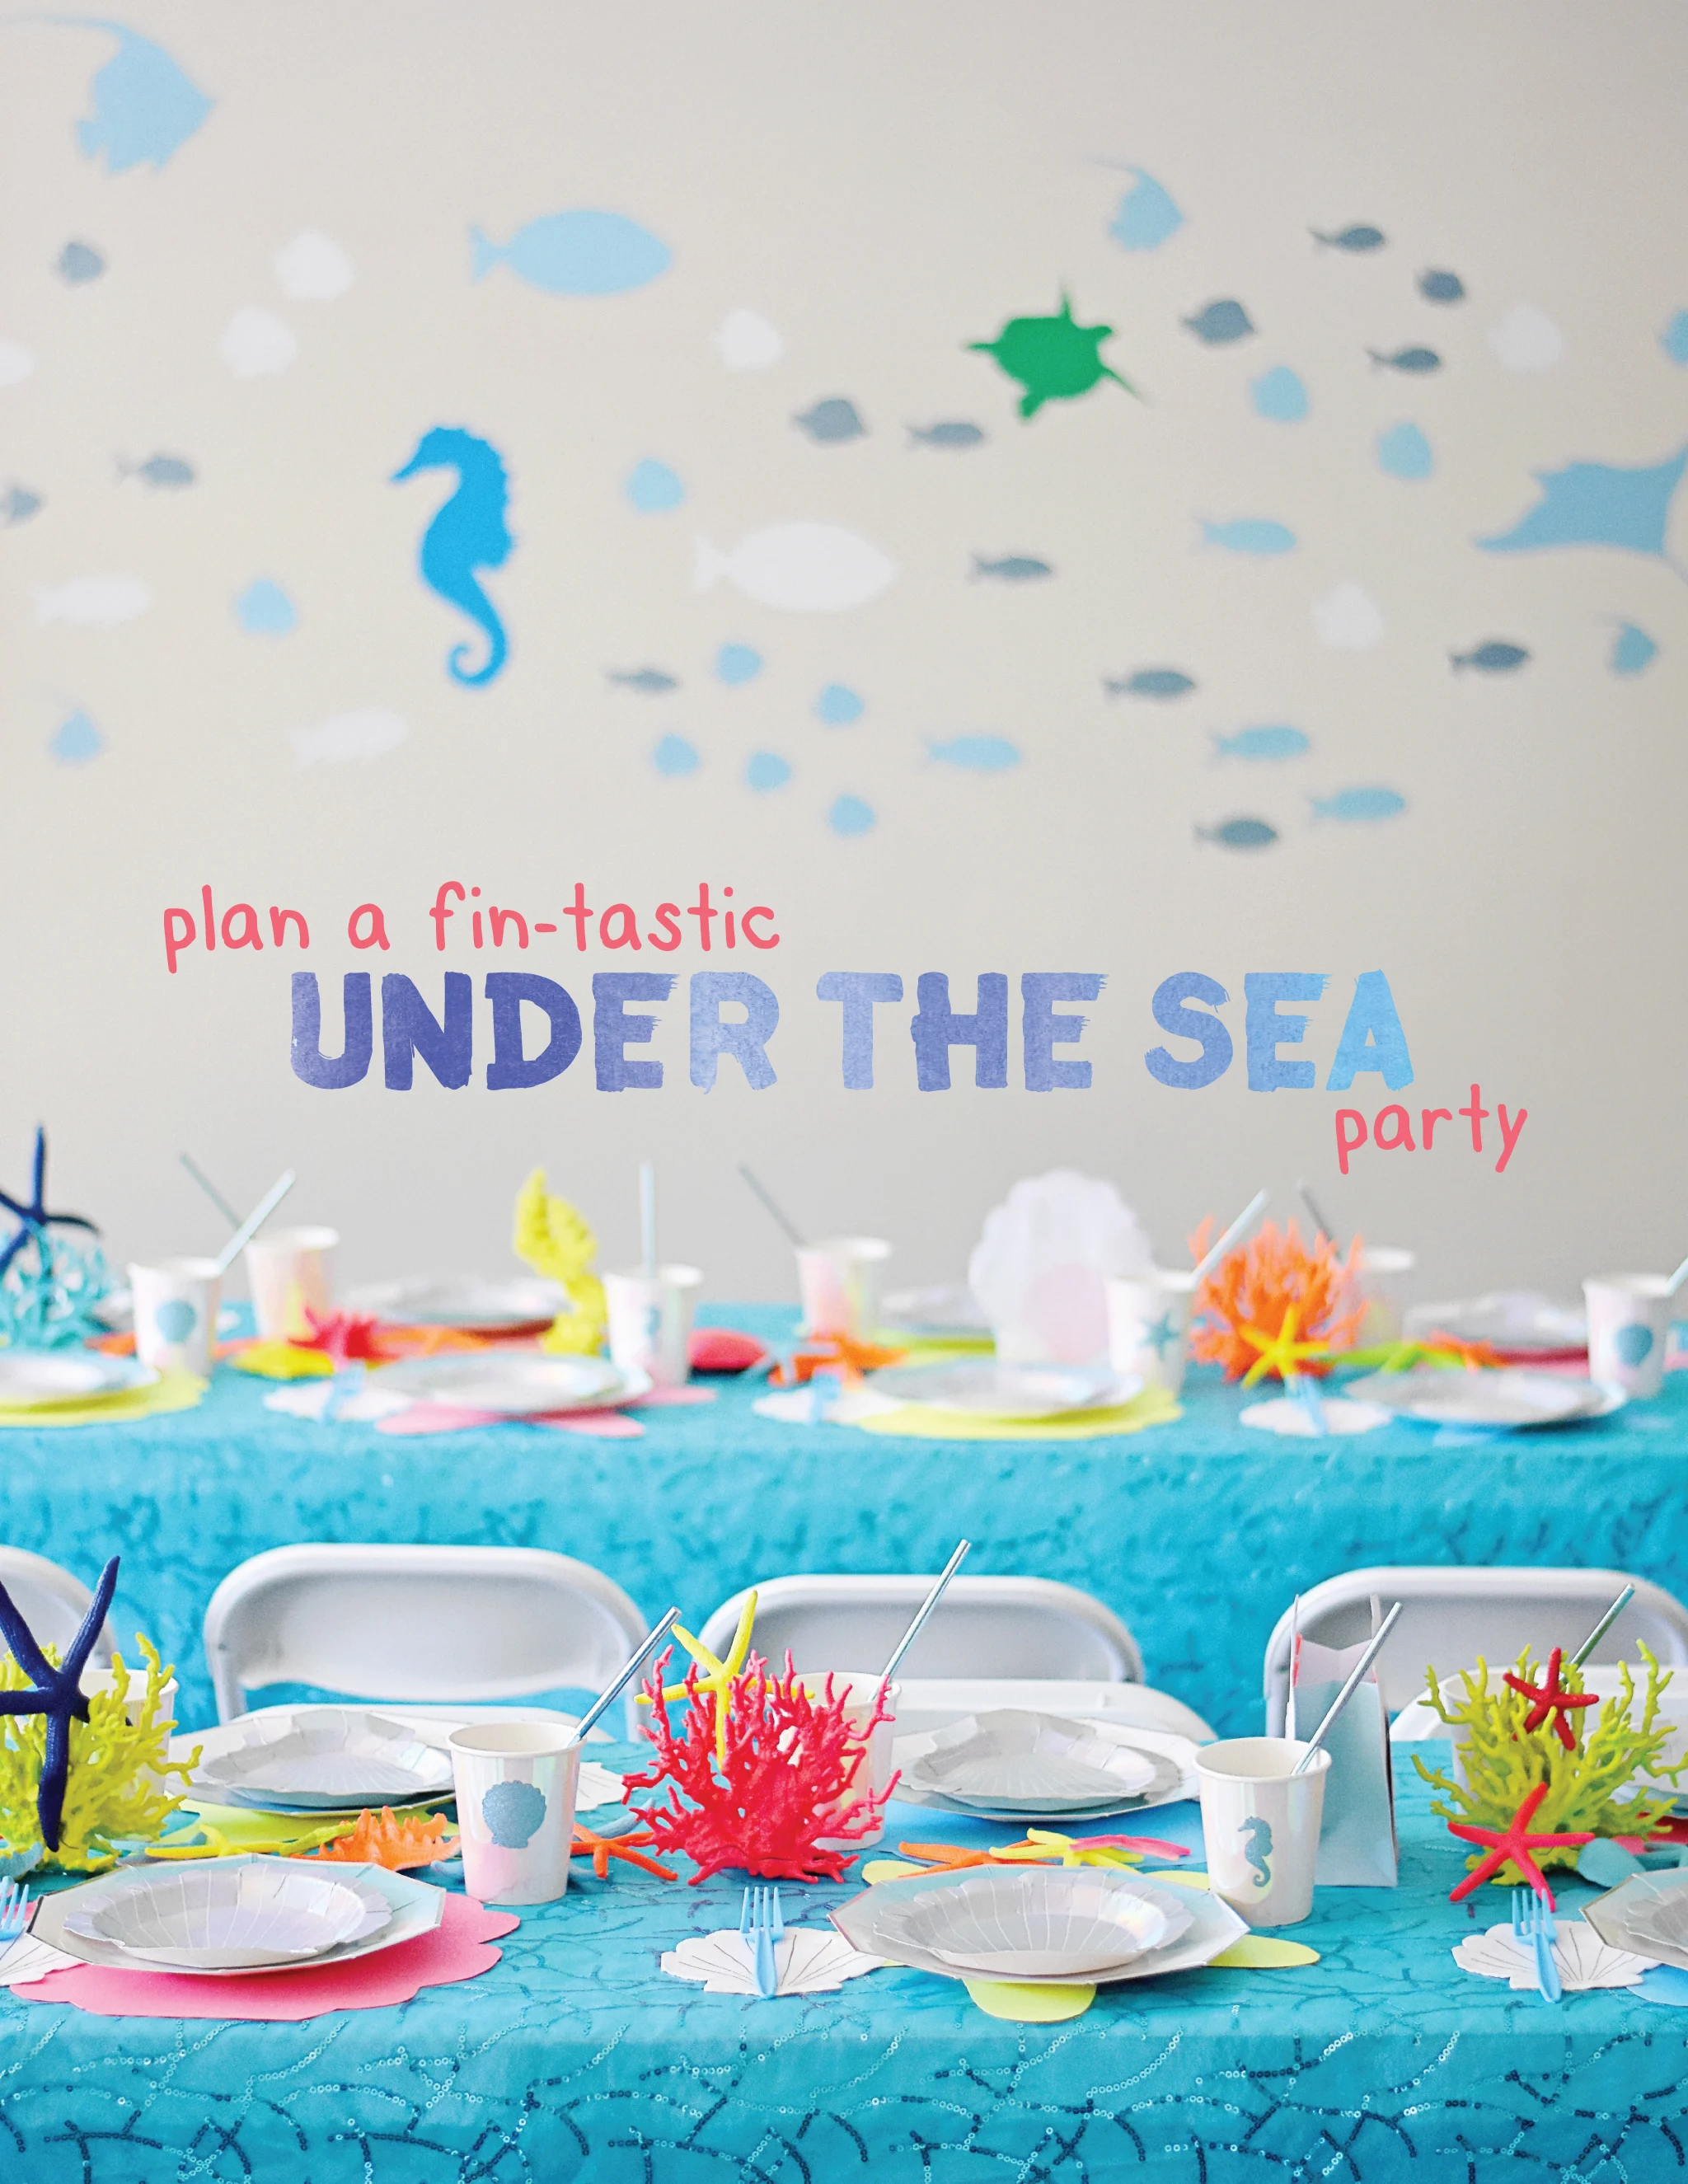 The Very Best Balloon Blog: Inspiration for Under the Sea Theme